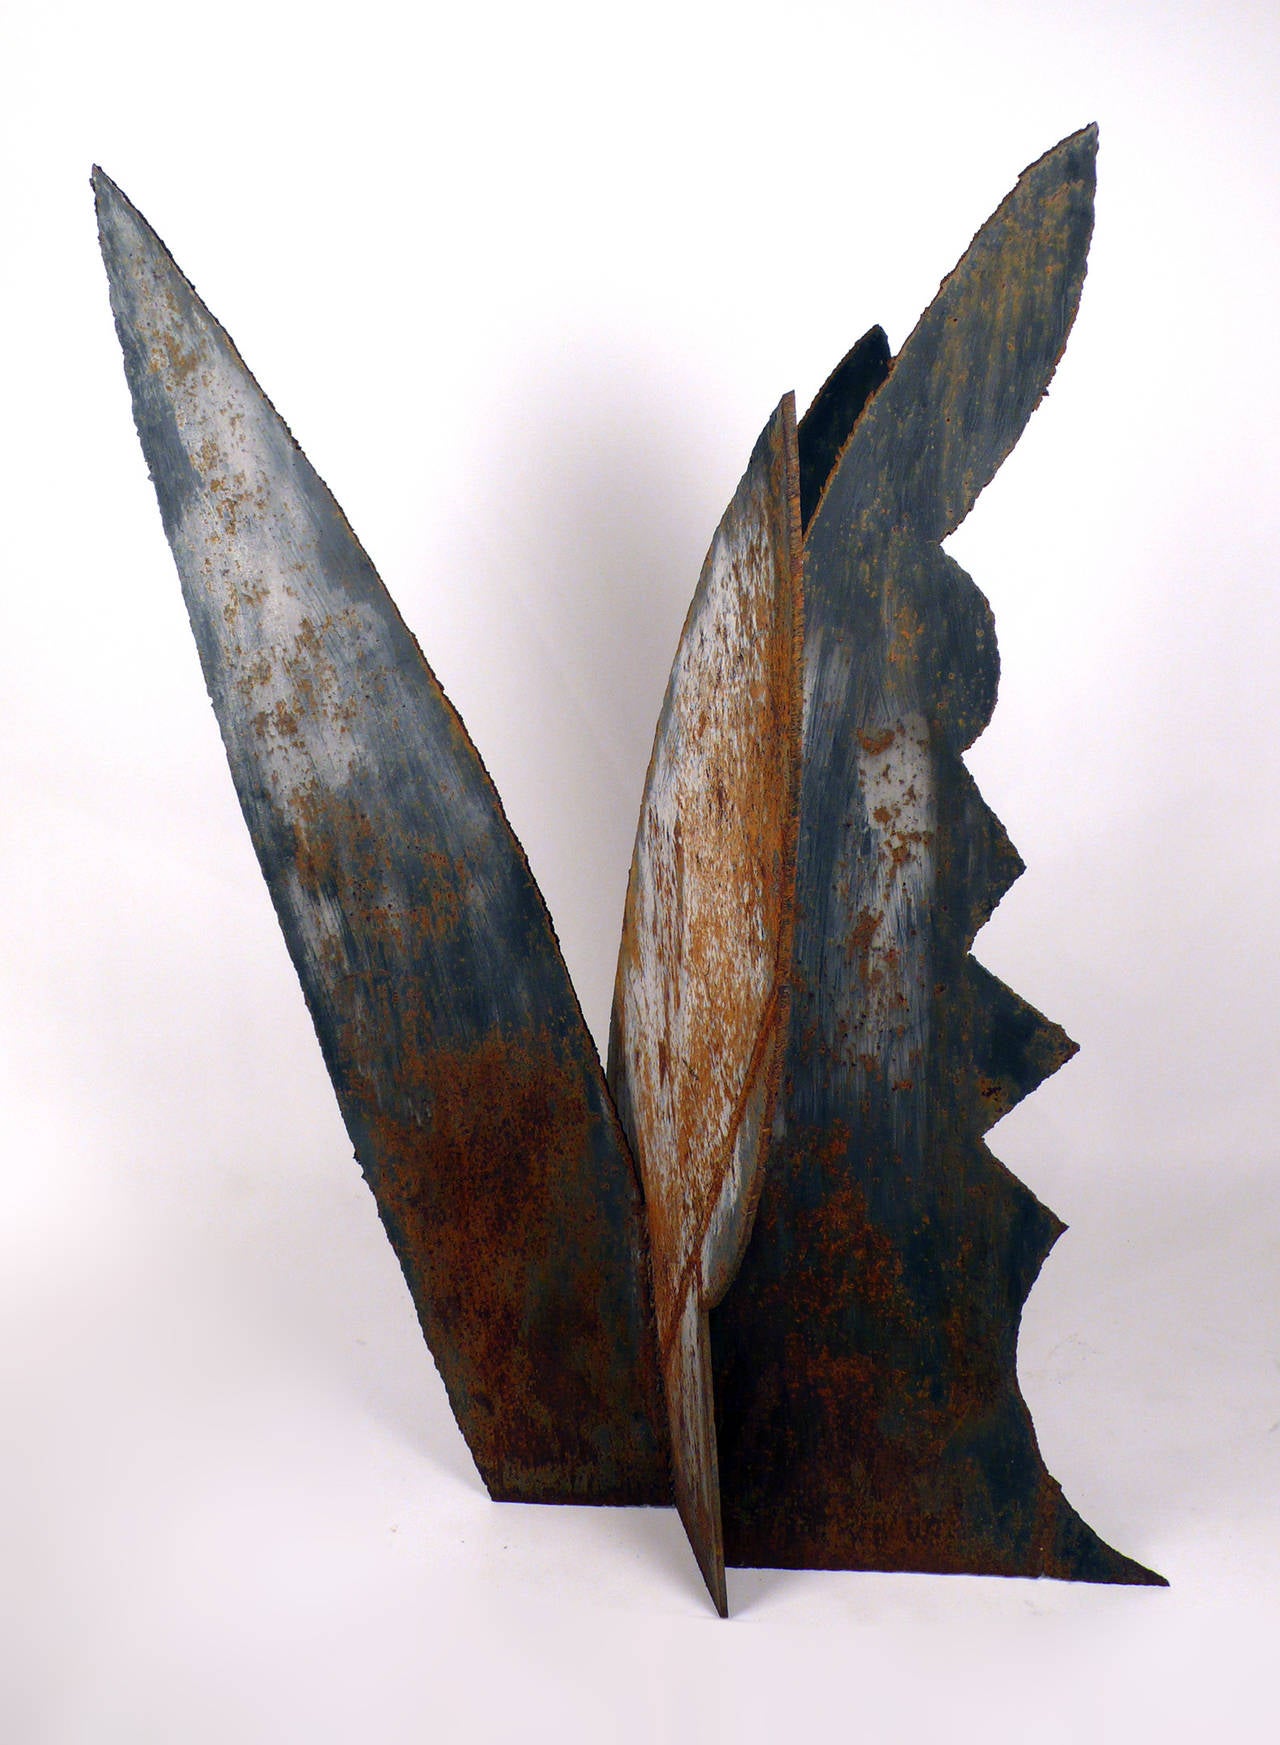 1960s Brutalist sculpture by Texas artist Dr. Sam Jagoda. This beautiful abstract work has a plant-like form that also has bird and insect qualities. Perfect for indoors or outdoors. The 1/4